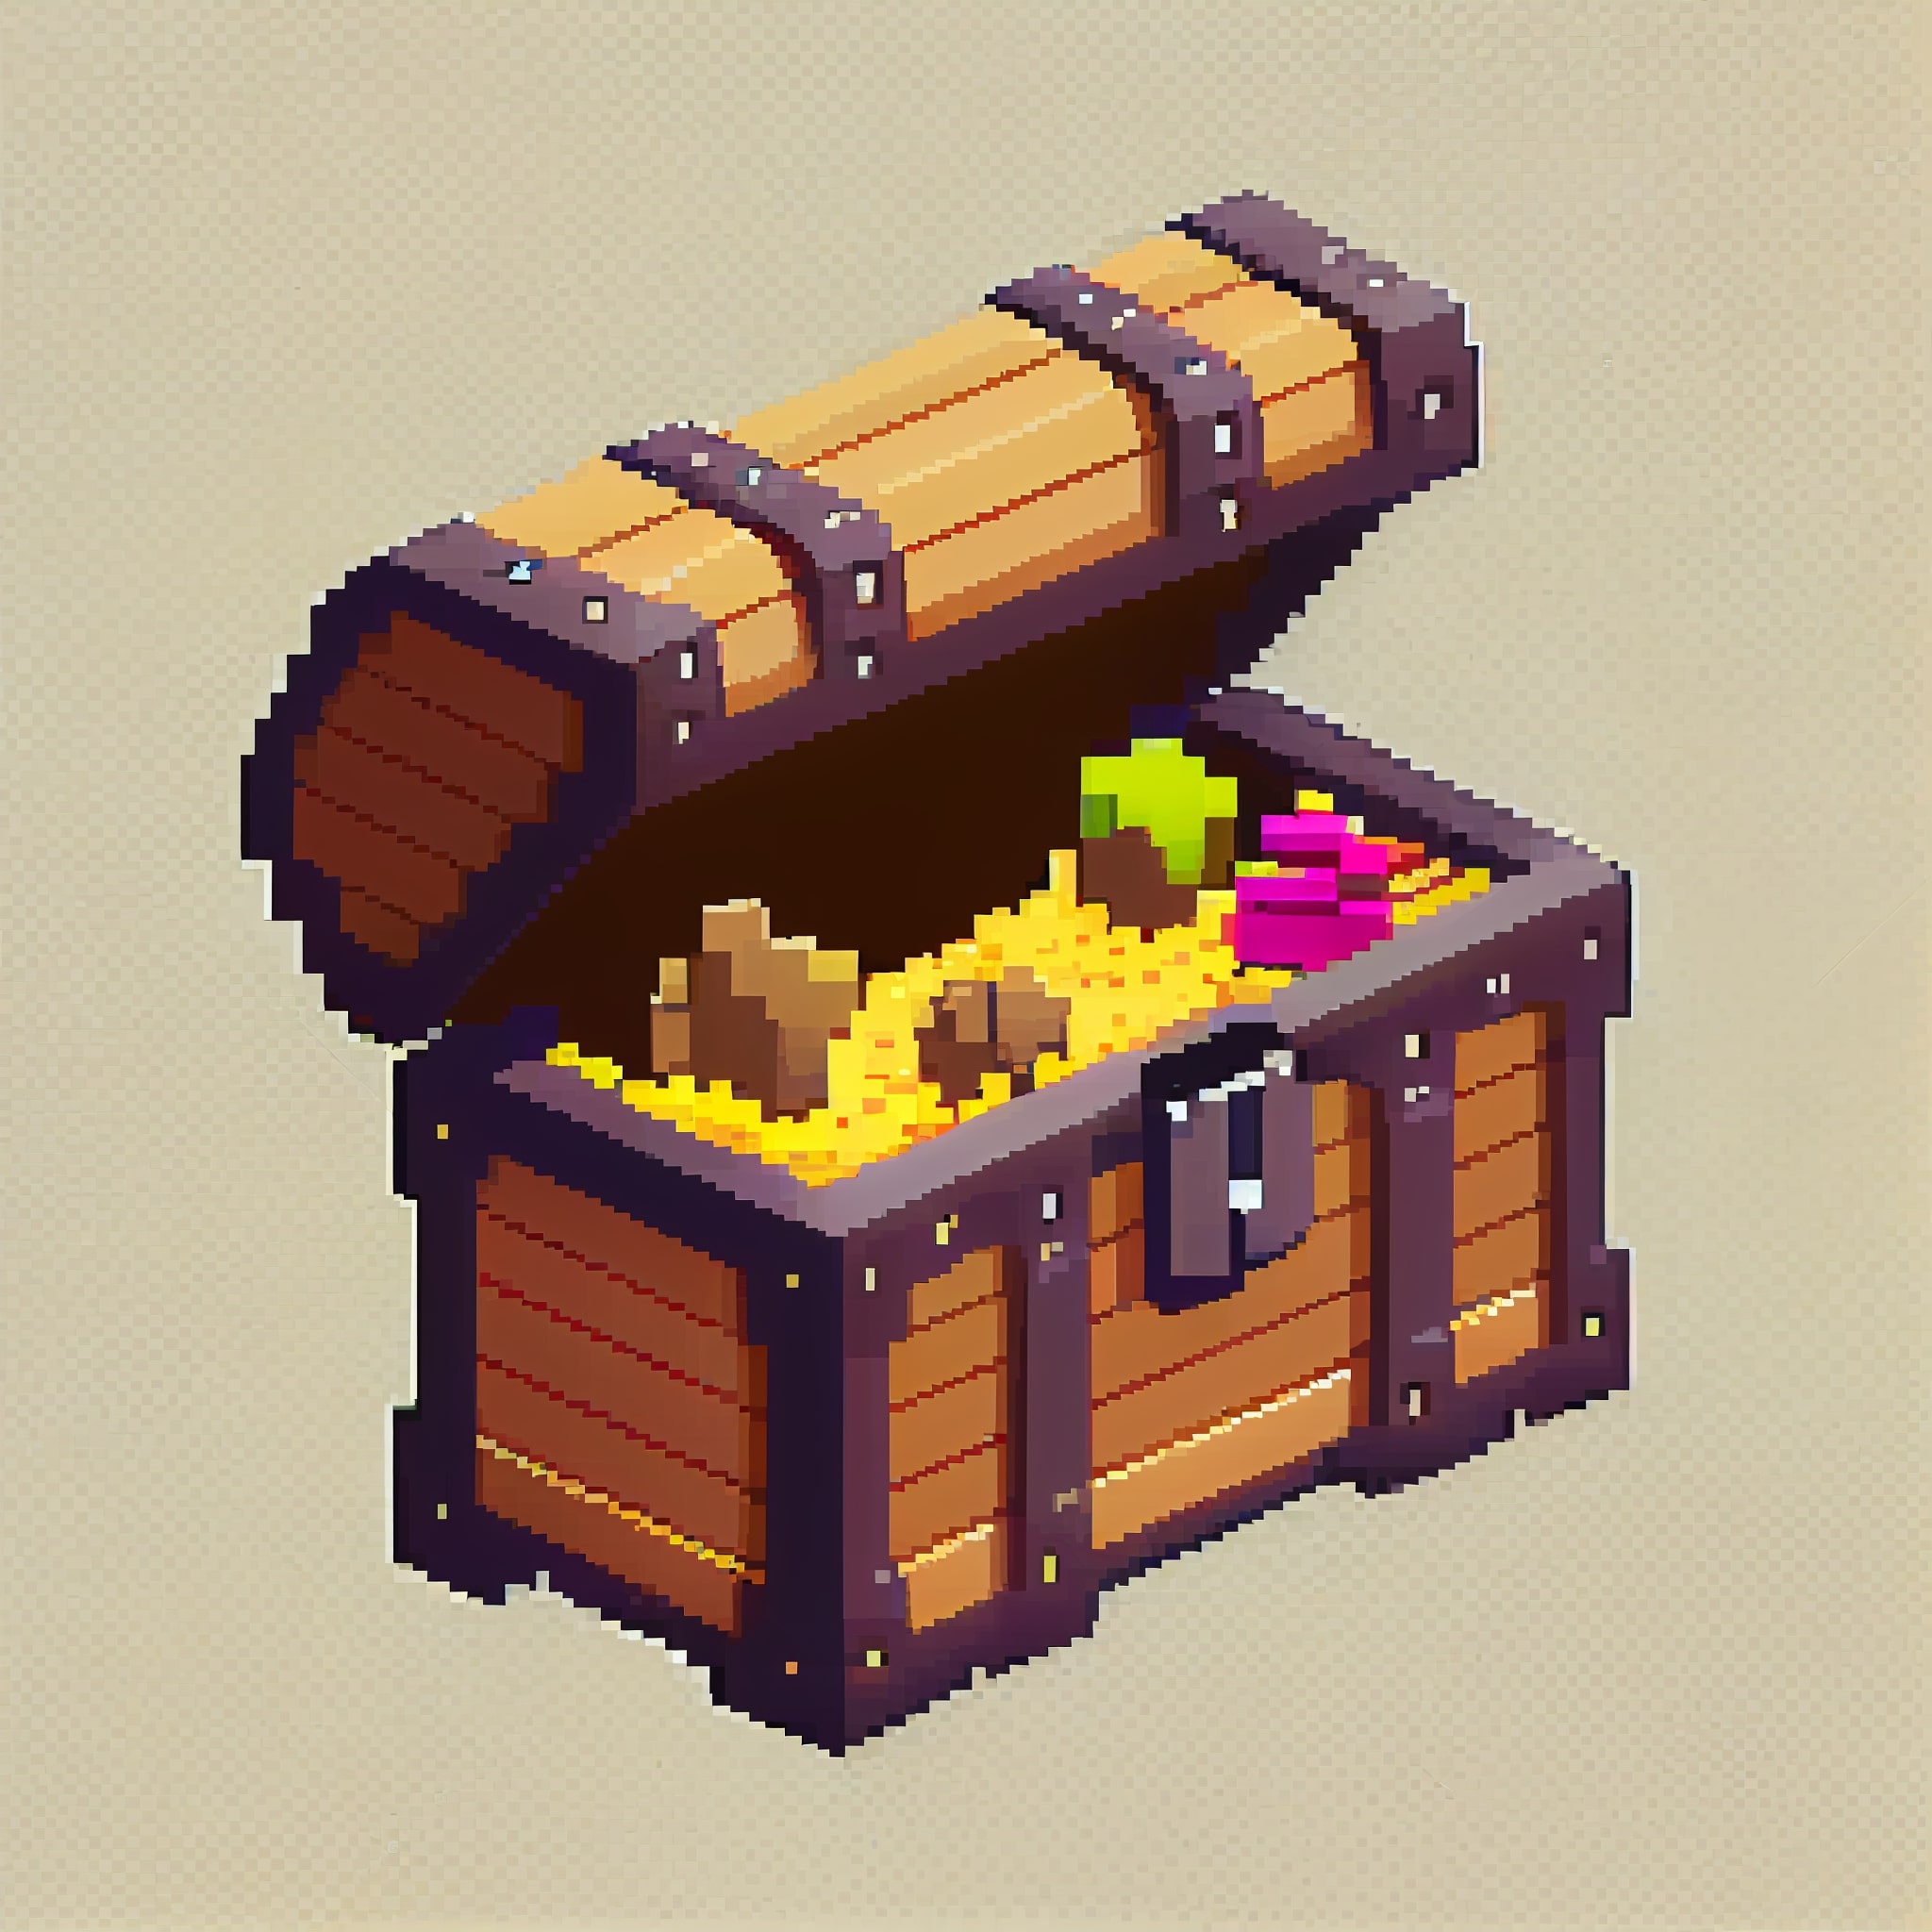 Chest filled with lots of gold coins.